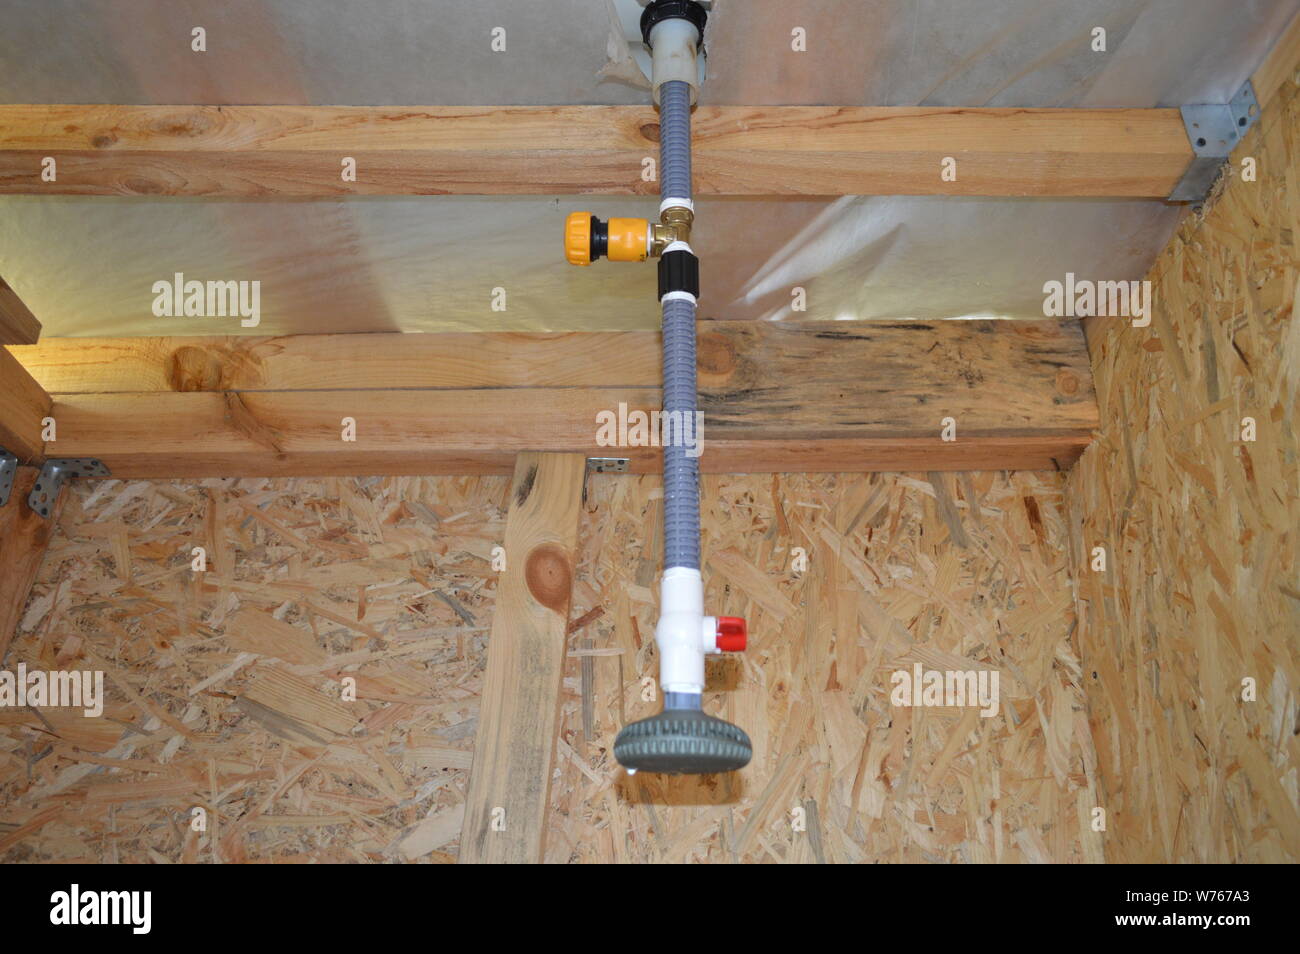 Plumbing in a private residential building Stock Photo